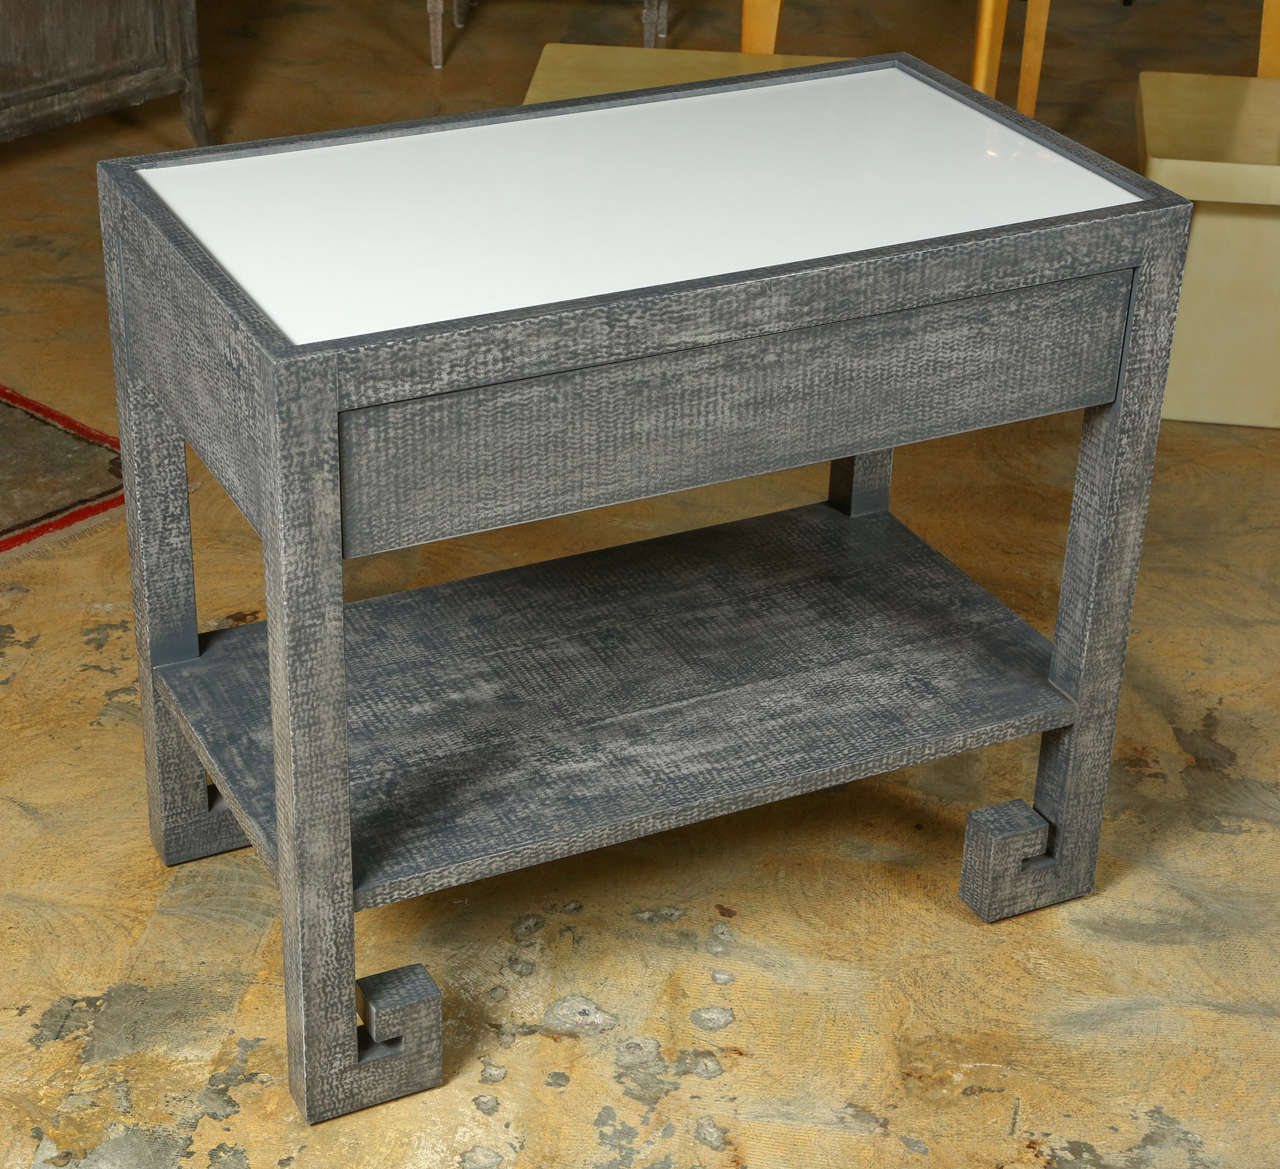 Modern Paul Marra Greek Key Nightstand in custom mottled gray finish and polished white lacquer inset top. One as shown in stock. 